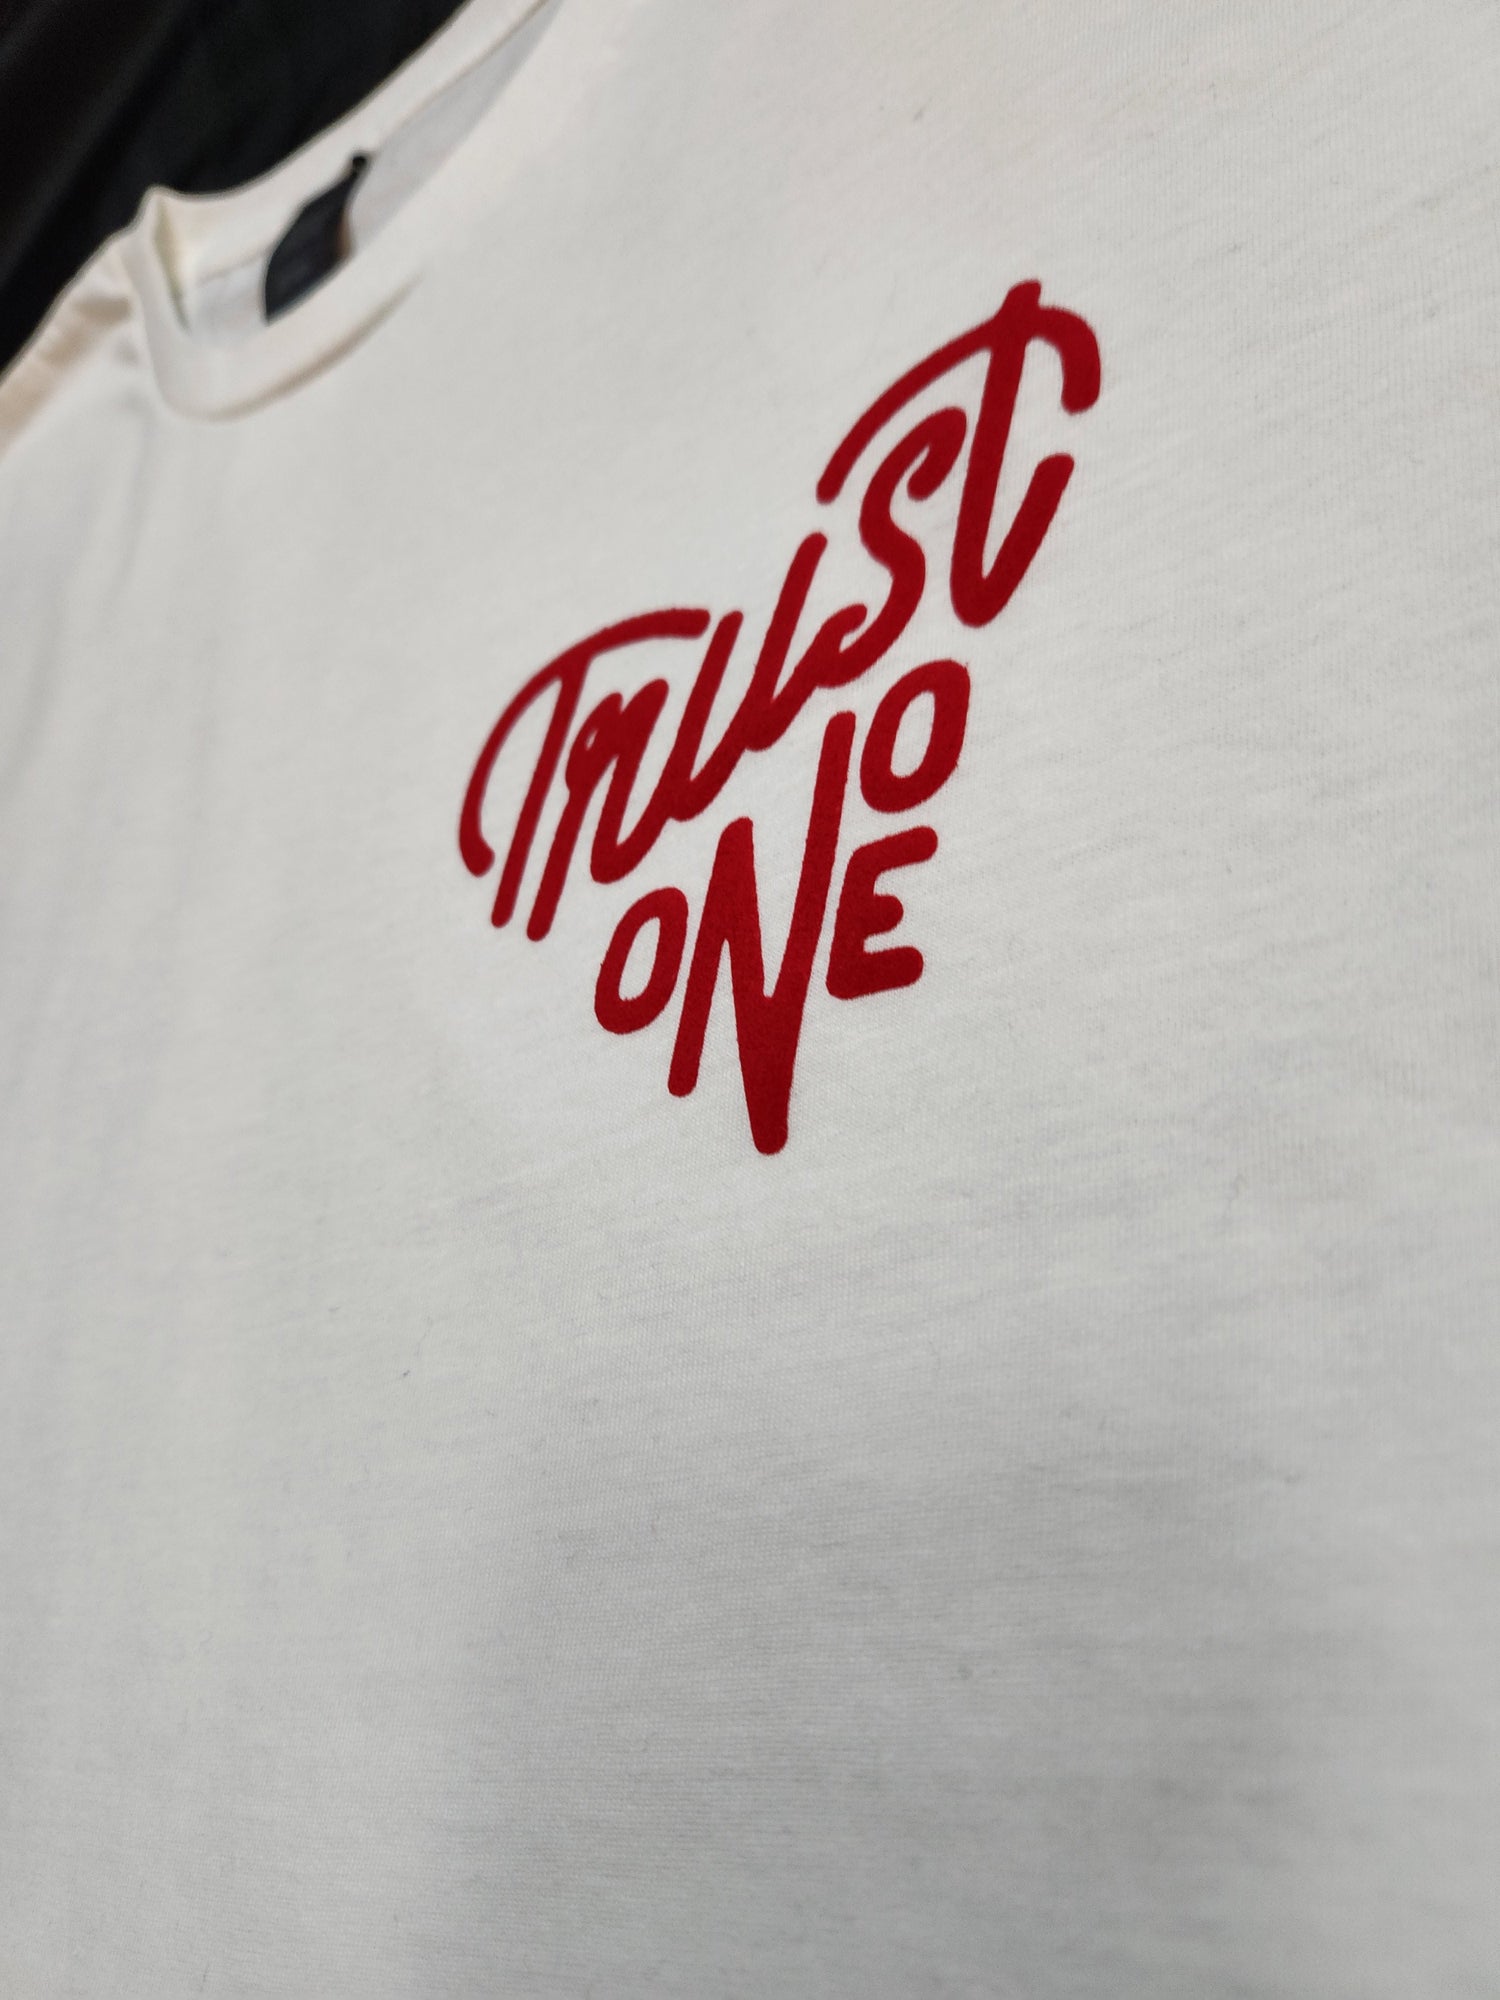 Trust No One T-Shirt - Centre Ave Clothing Co.